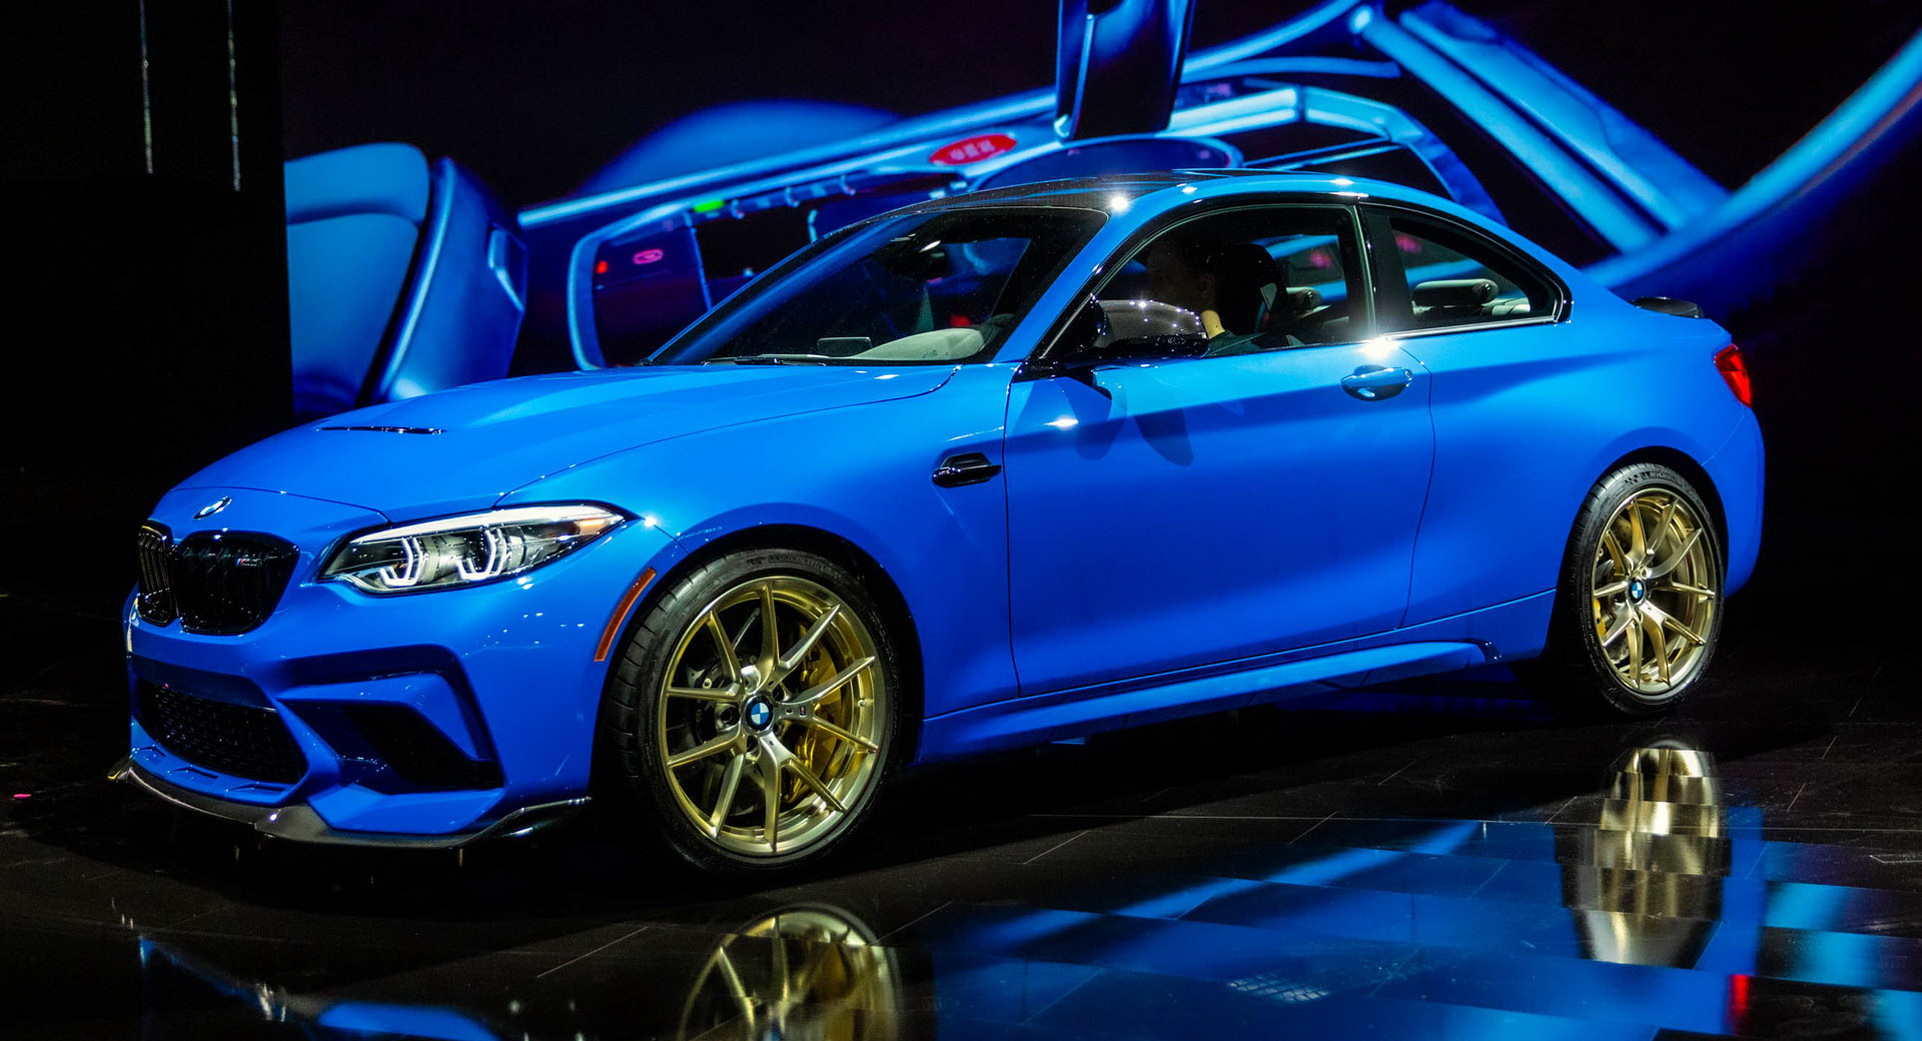 The 2020 BMW M2 CS Sends Out The 2 Series With A Lot Of Carbon Fiber